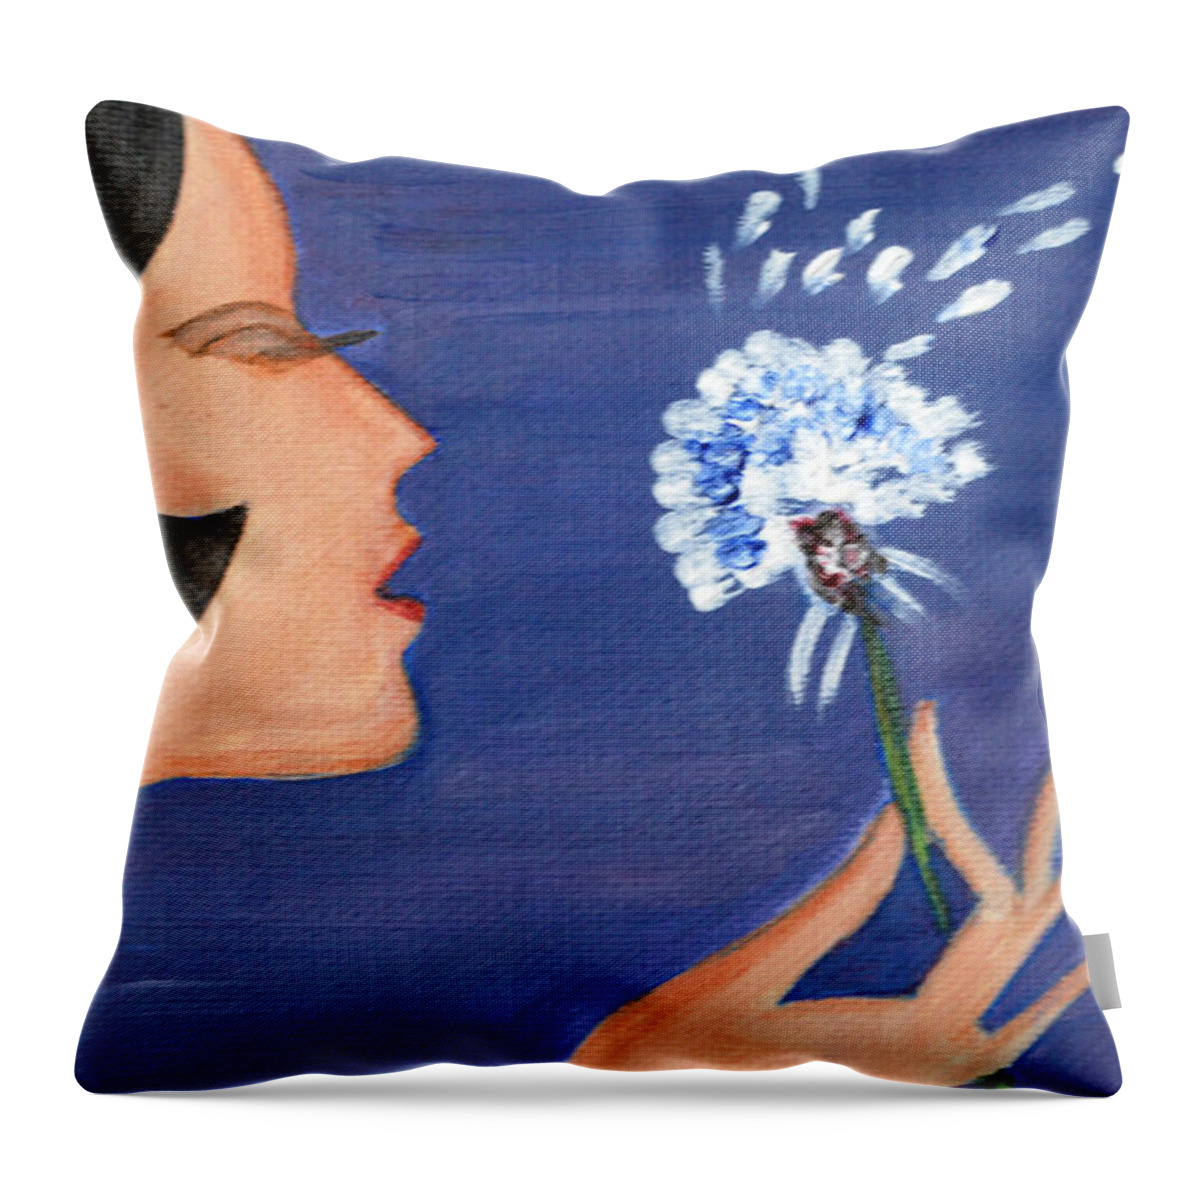 Acrylic Throw Pillow featuring the painting Whisper by Sonali Kukreja